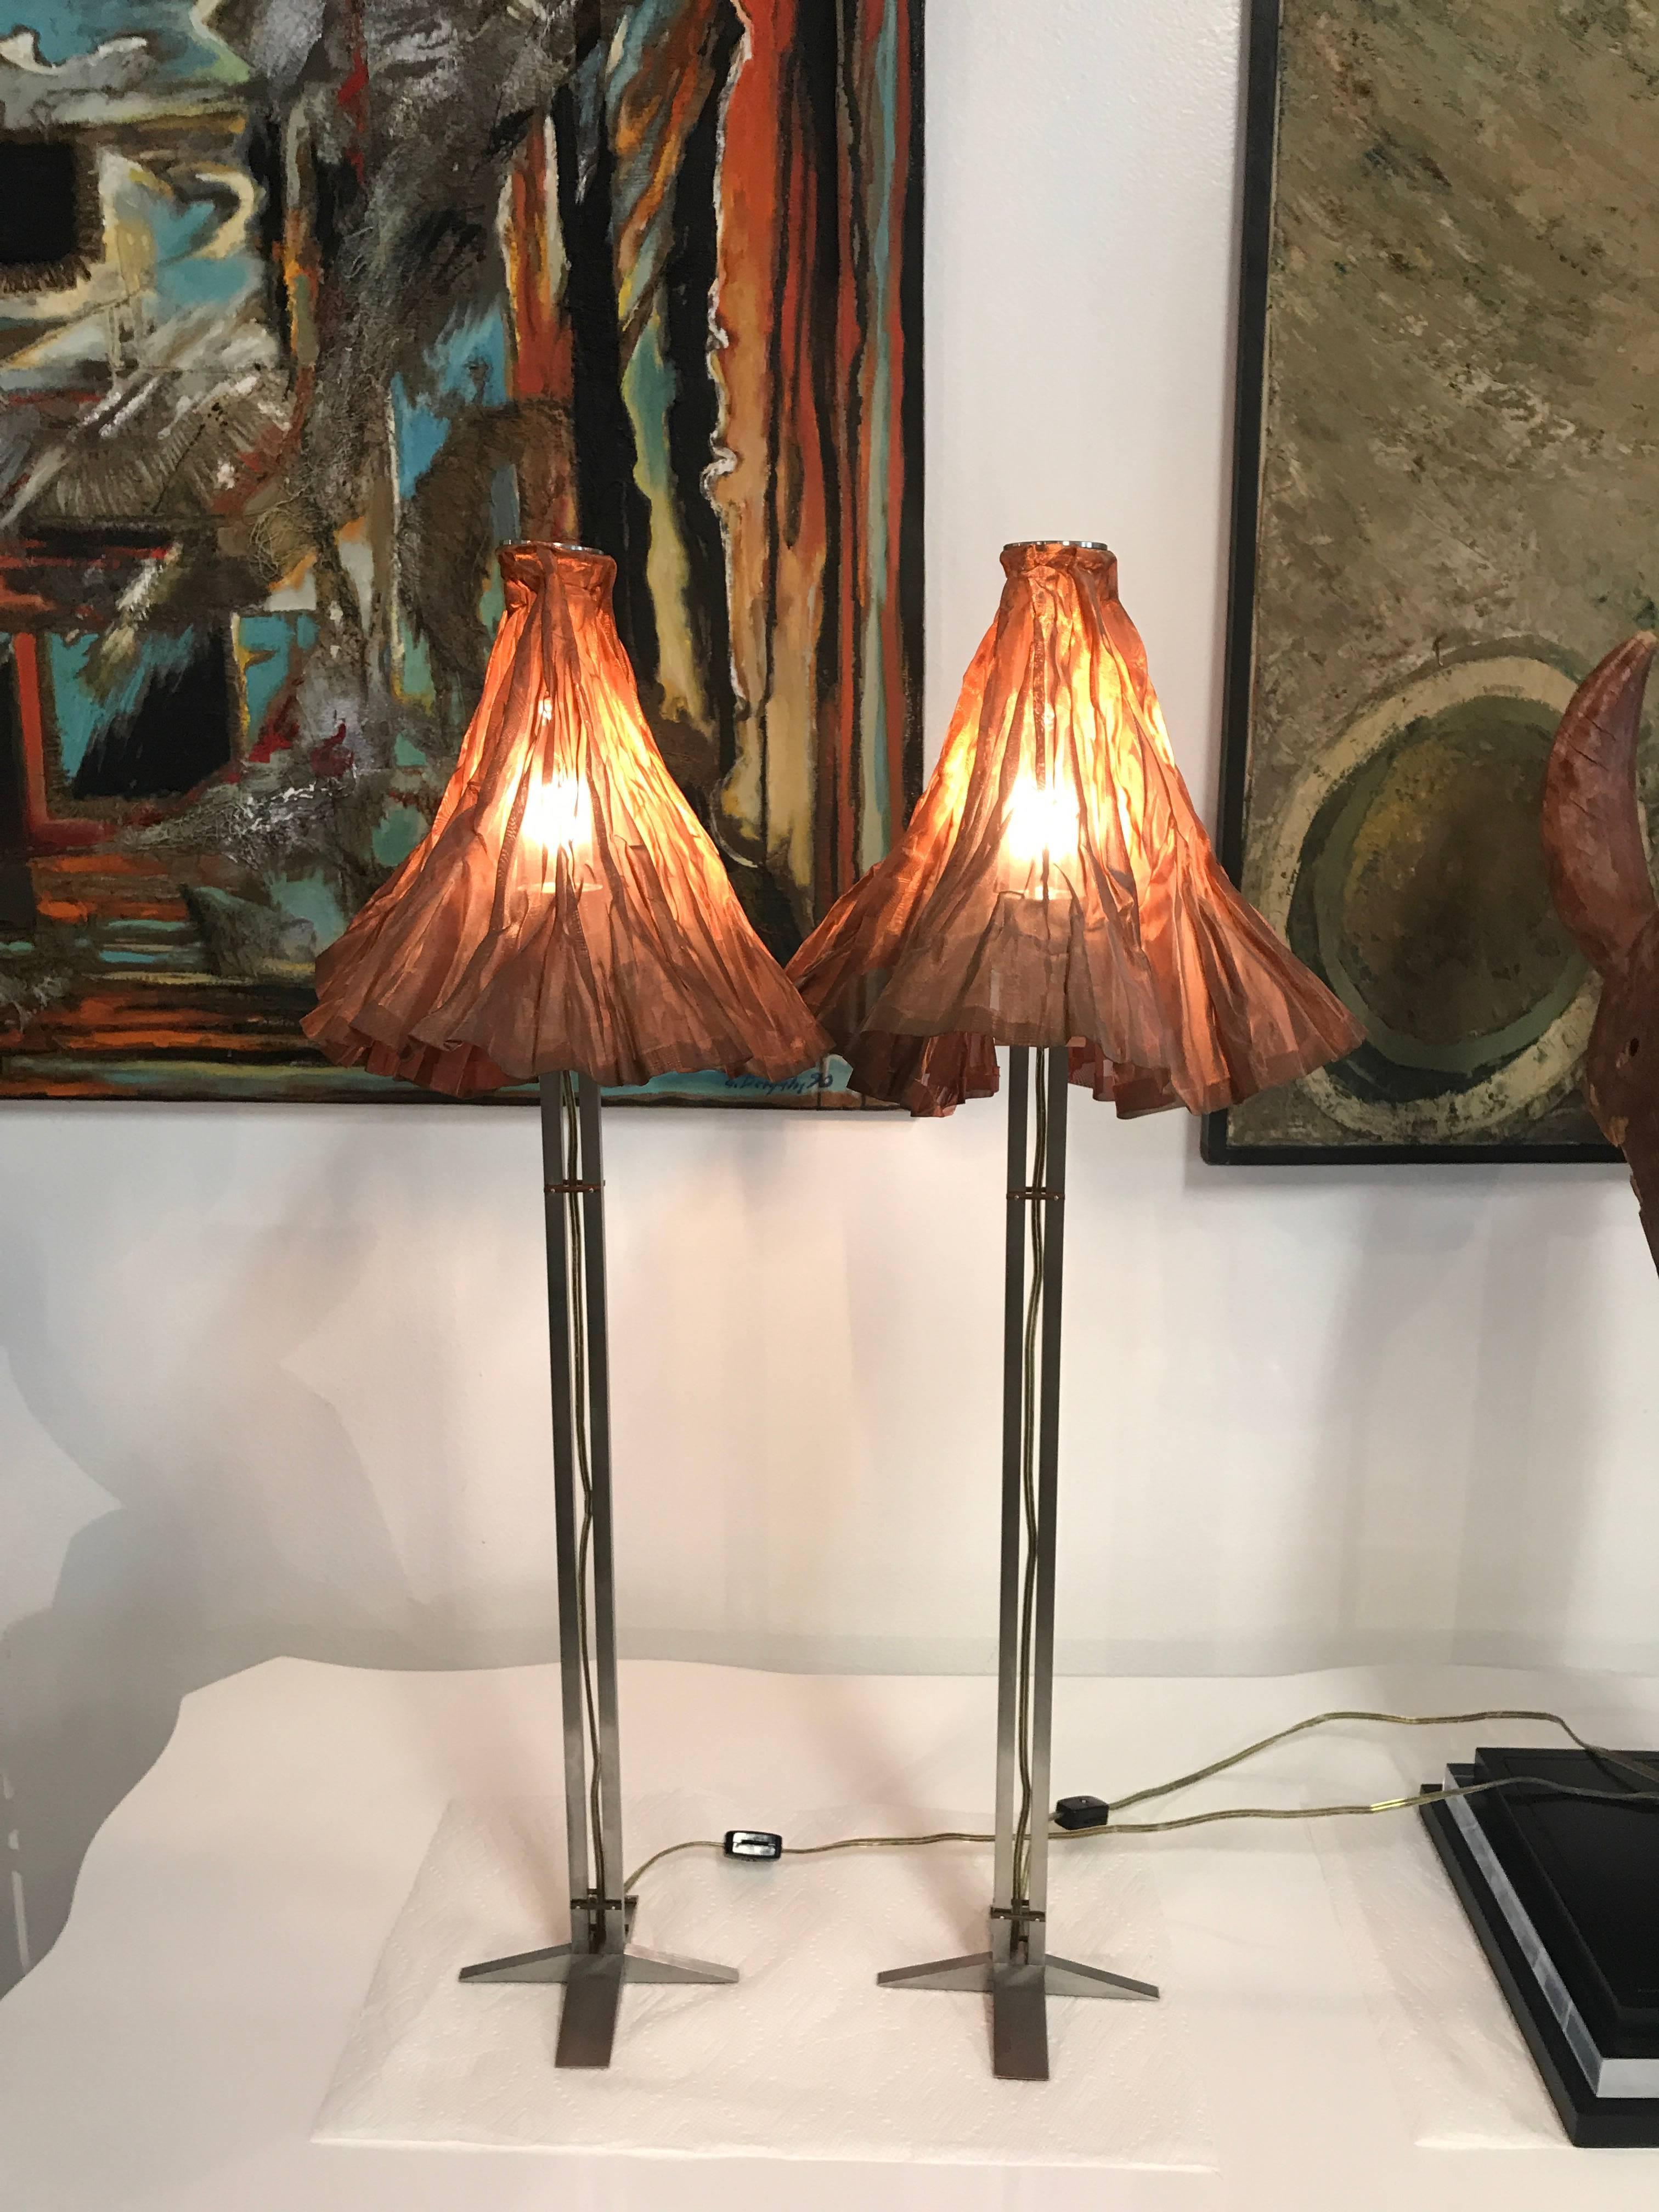 A nice pair of artisan made lamps with nice metal mesh shades. Pretty Industrial design. They are in good shape with minor scratches and marks.